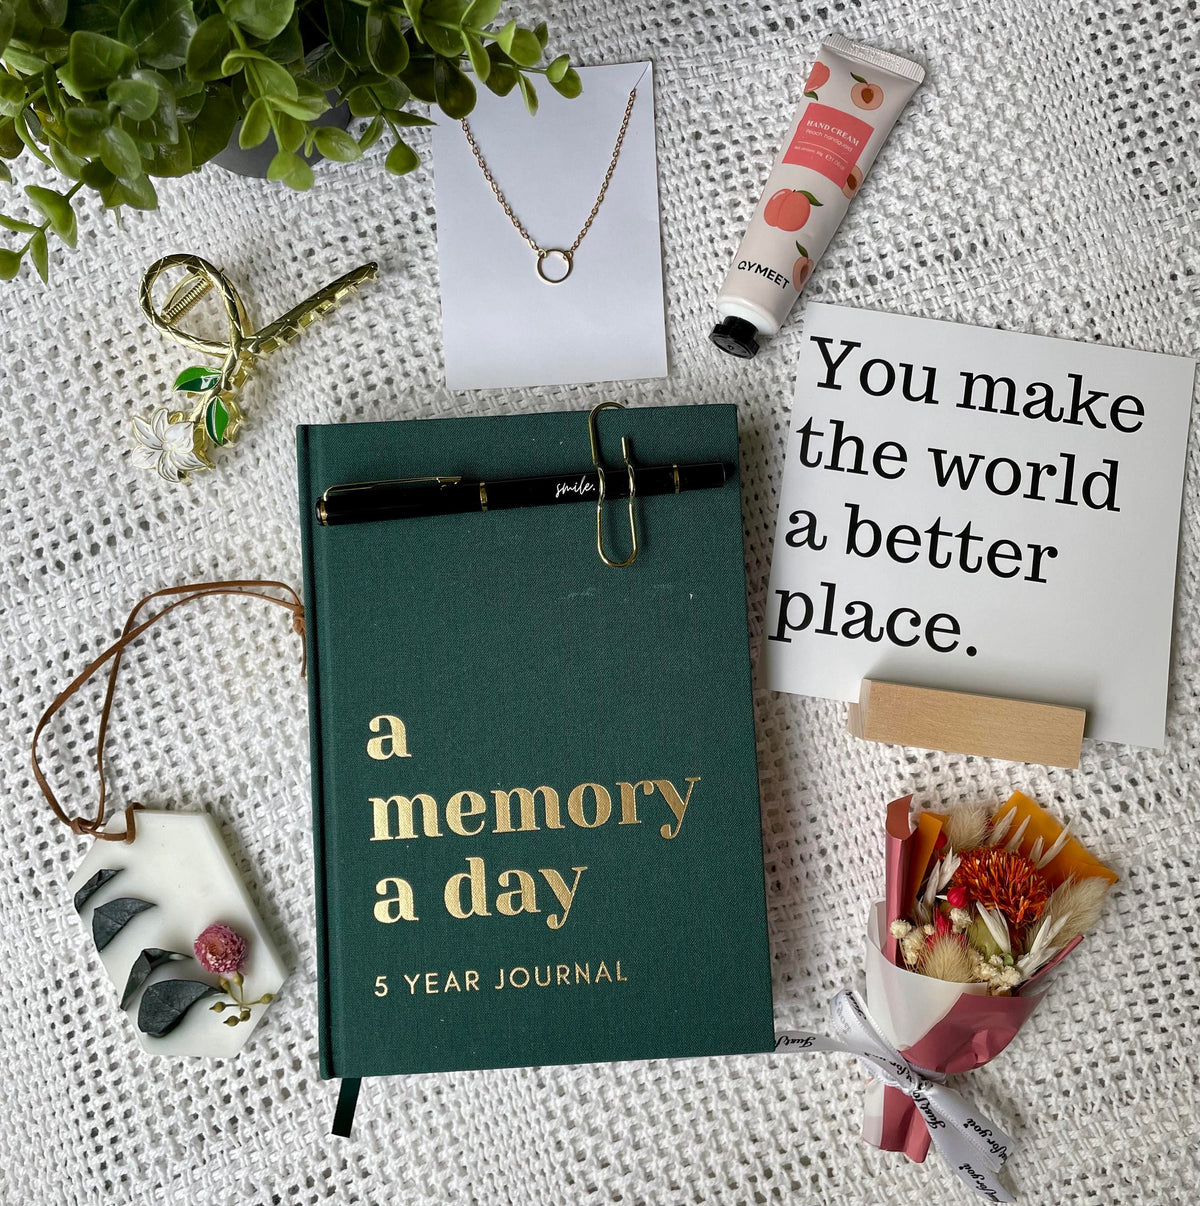 Memory a Day Journal Gift Box You Make the World a Better Place, Thinking of You, Gift for Mom, Shippable Gift, Just Because, Get Well Gift,